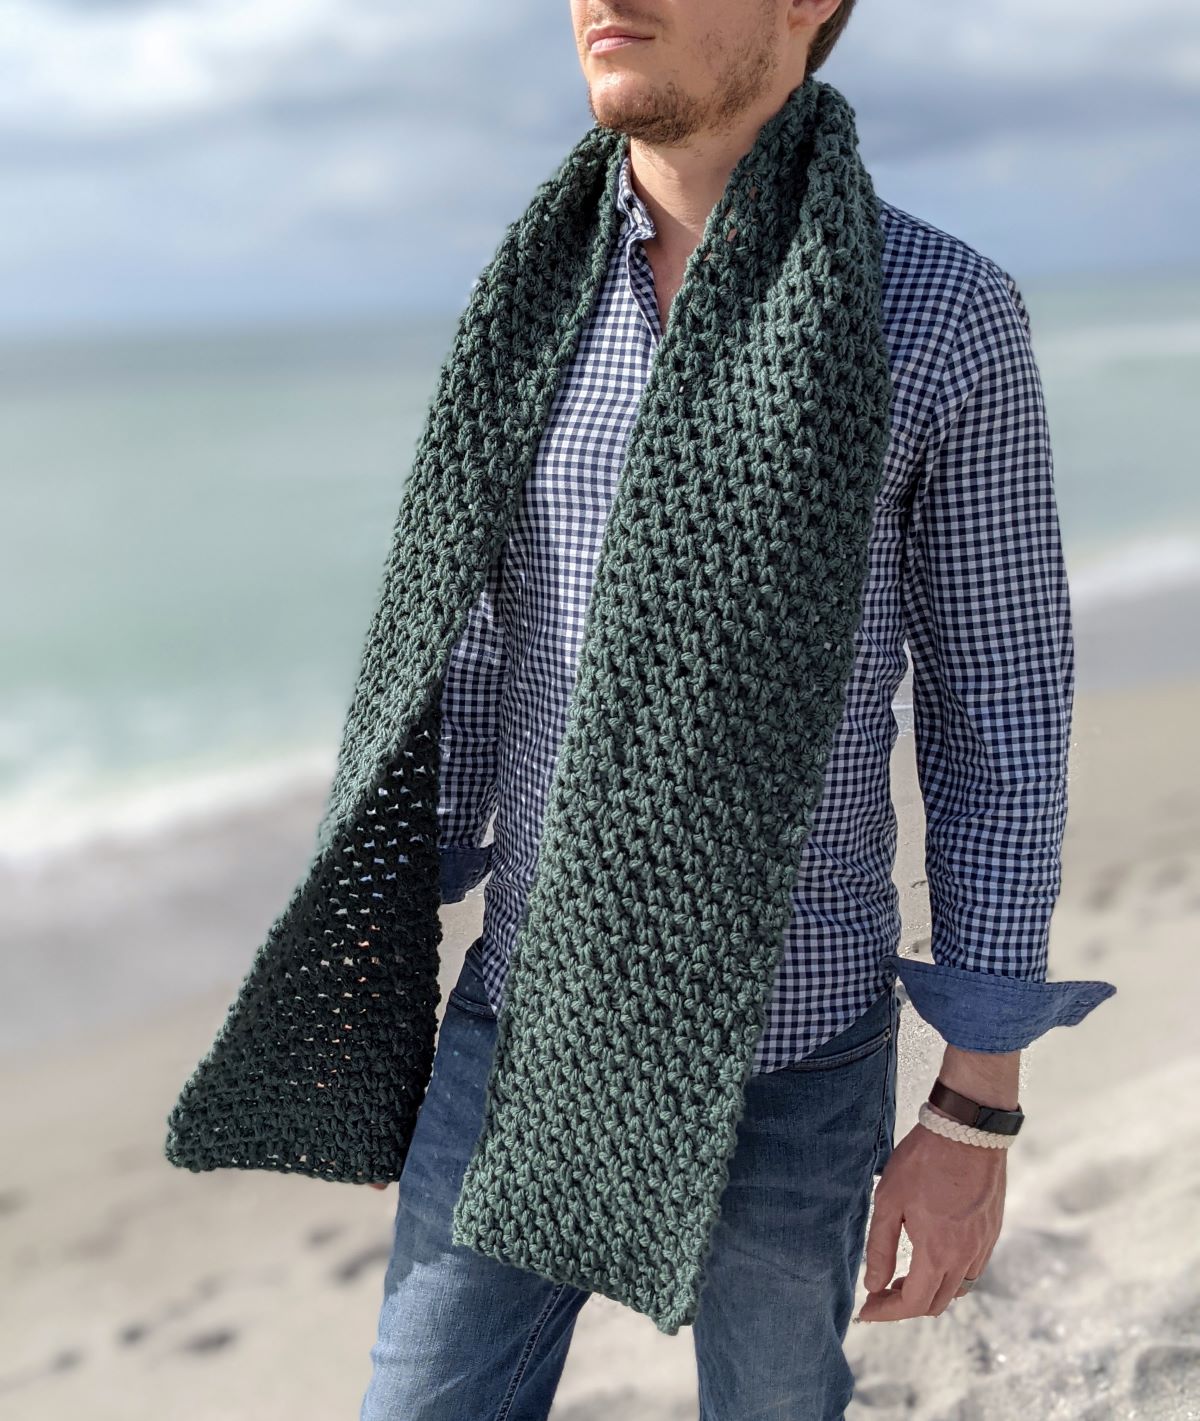 model is wearing an oversized textured classic men's crochet scarf pattern in the color Juniper by Hue + Me yarn